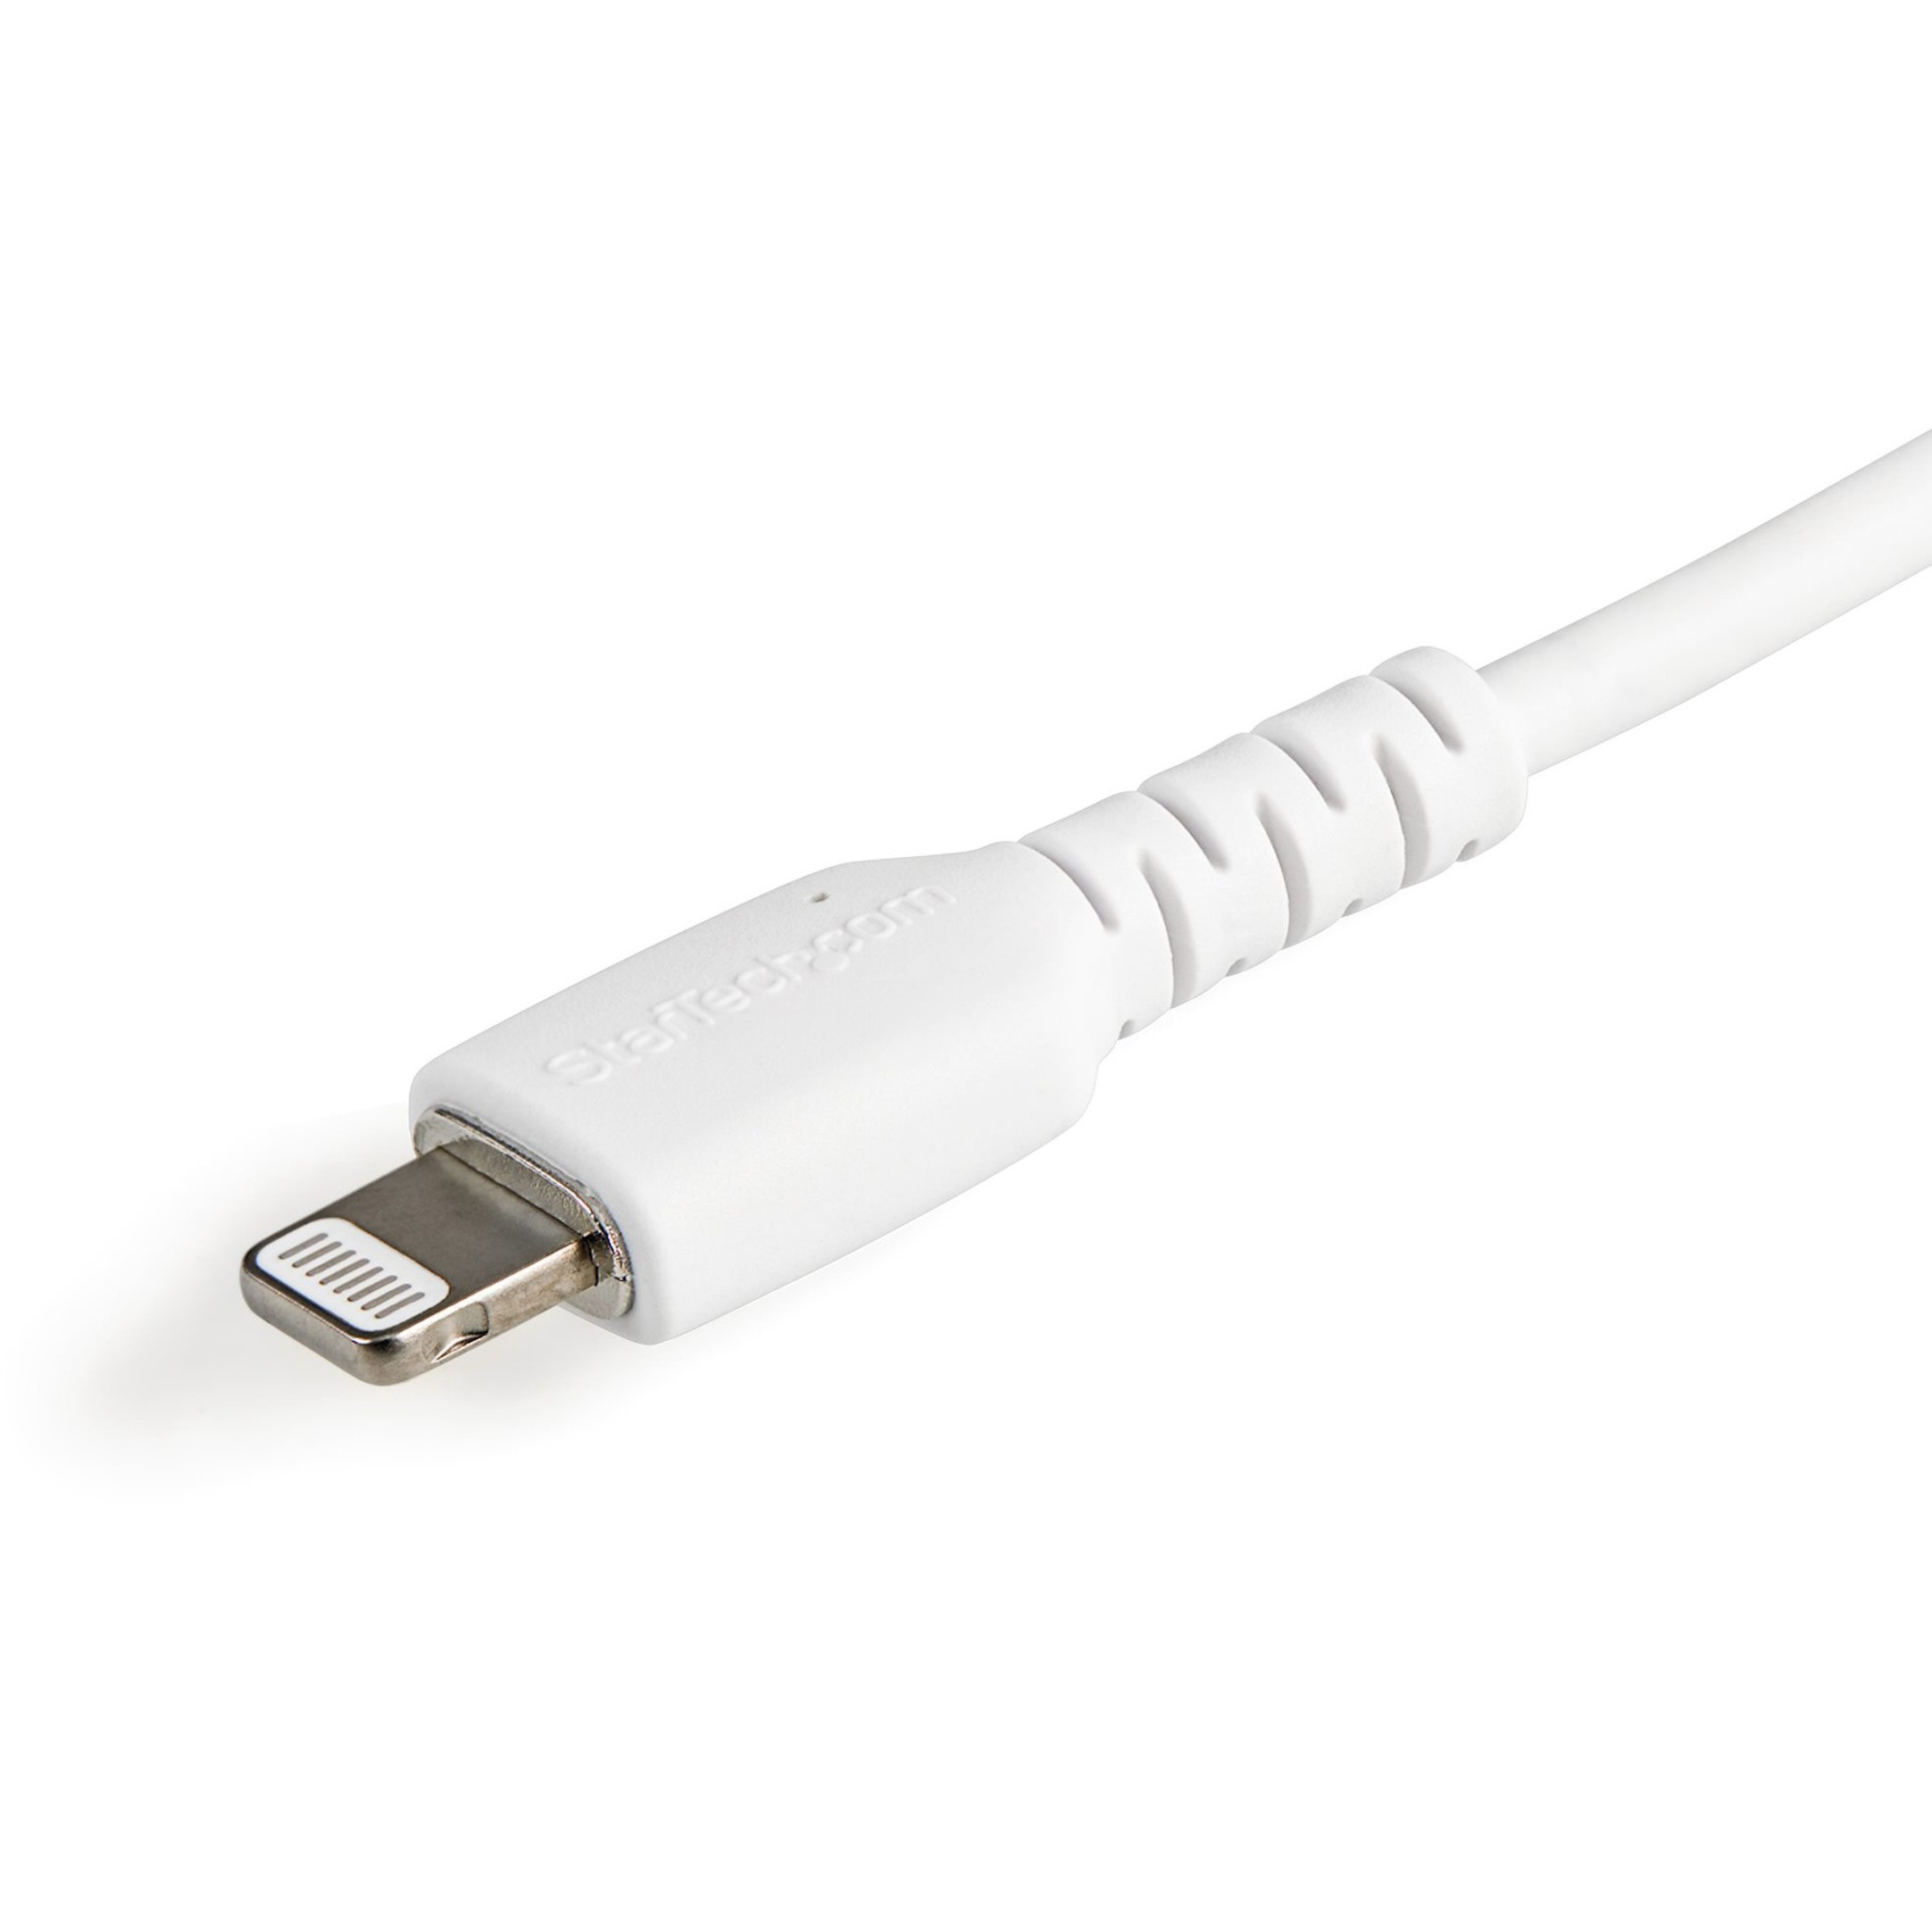 30 cm (11 in) USB to Lightning Cable - Short iPhone / iPad / iPod Charger  Cable - Lightning to USB Cable - Apple MFi Certified - White